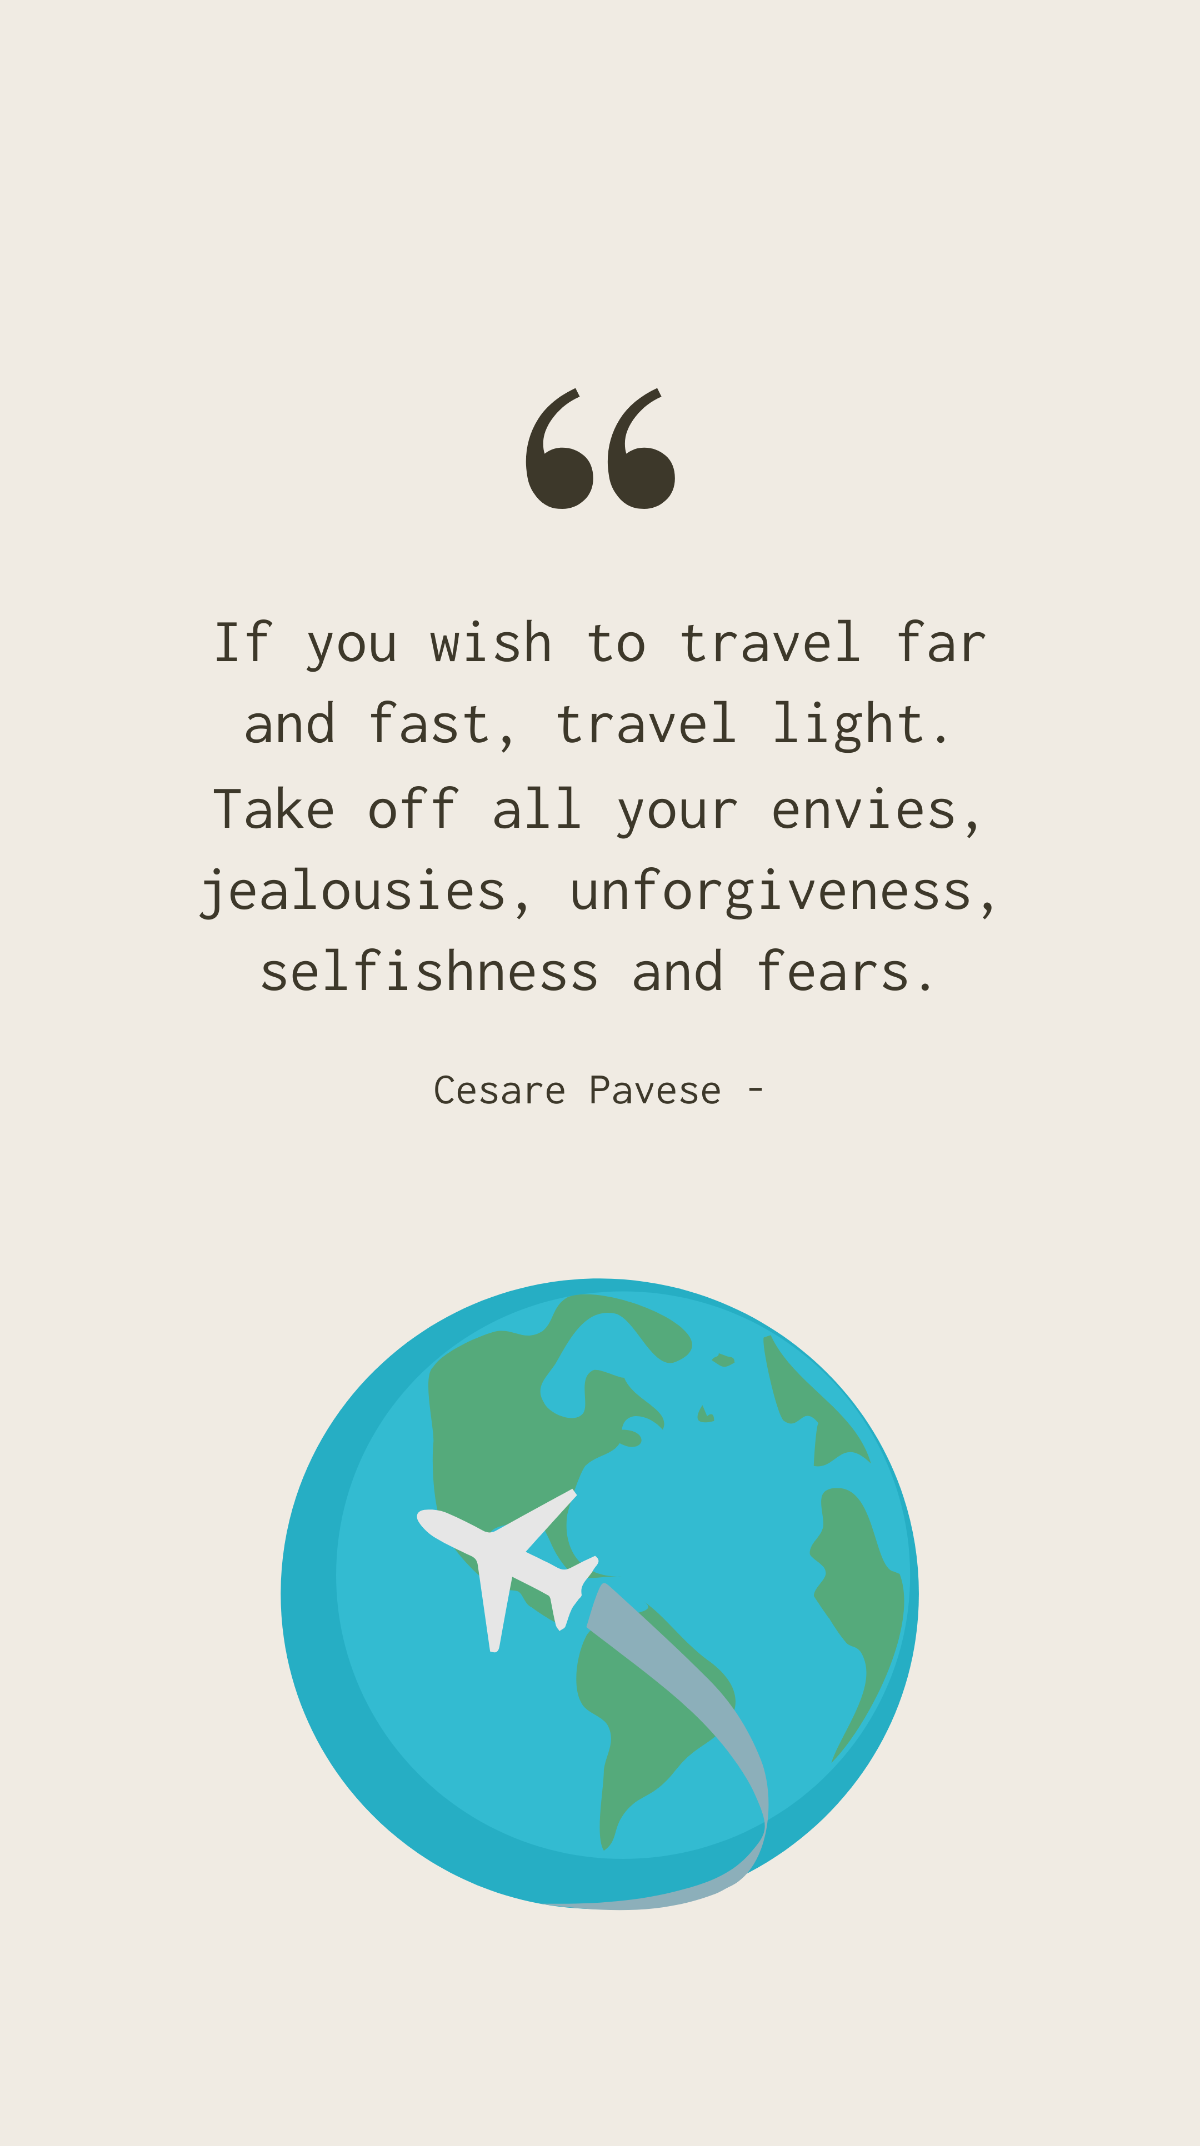 Free Cesare Pavese - If you wish to travel far and fast, travel light. Take off all your envies, jealousies, unforgiveness, selfishness and fears. Template